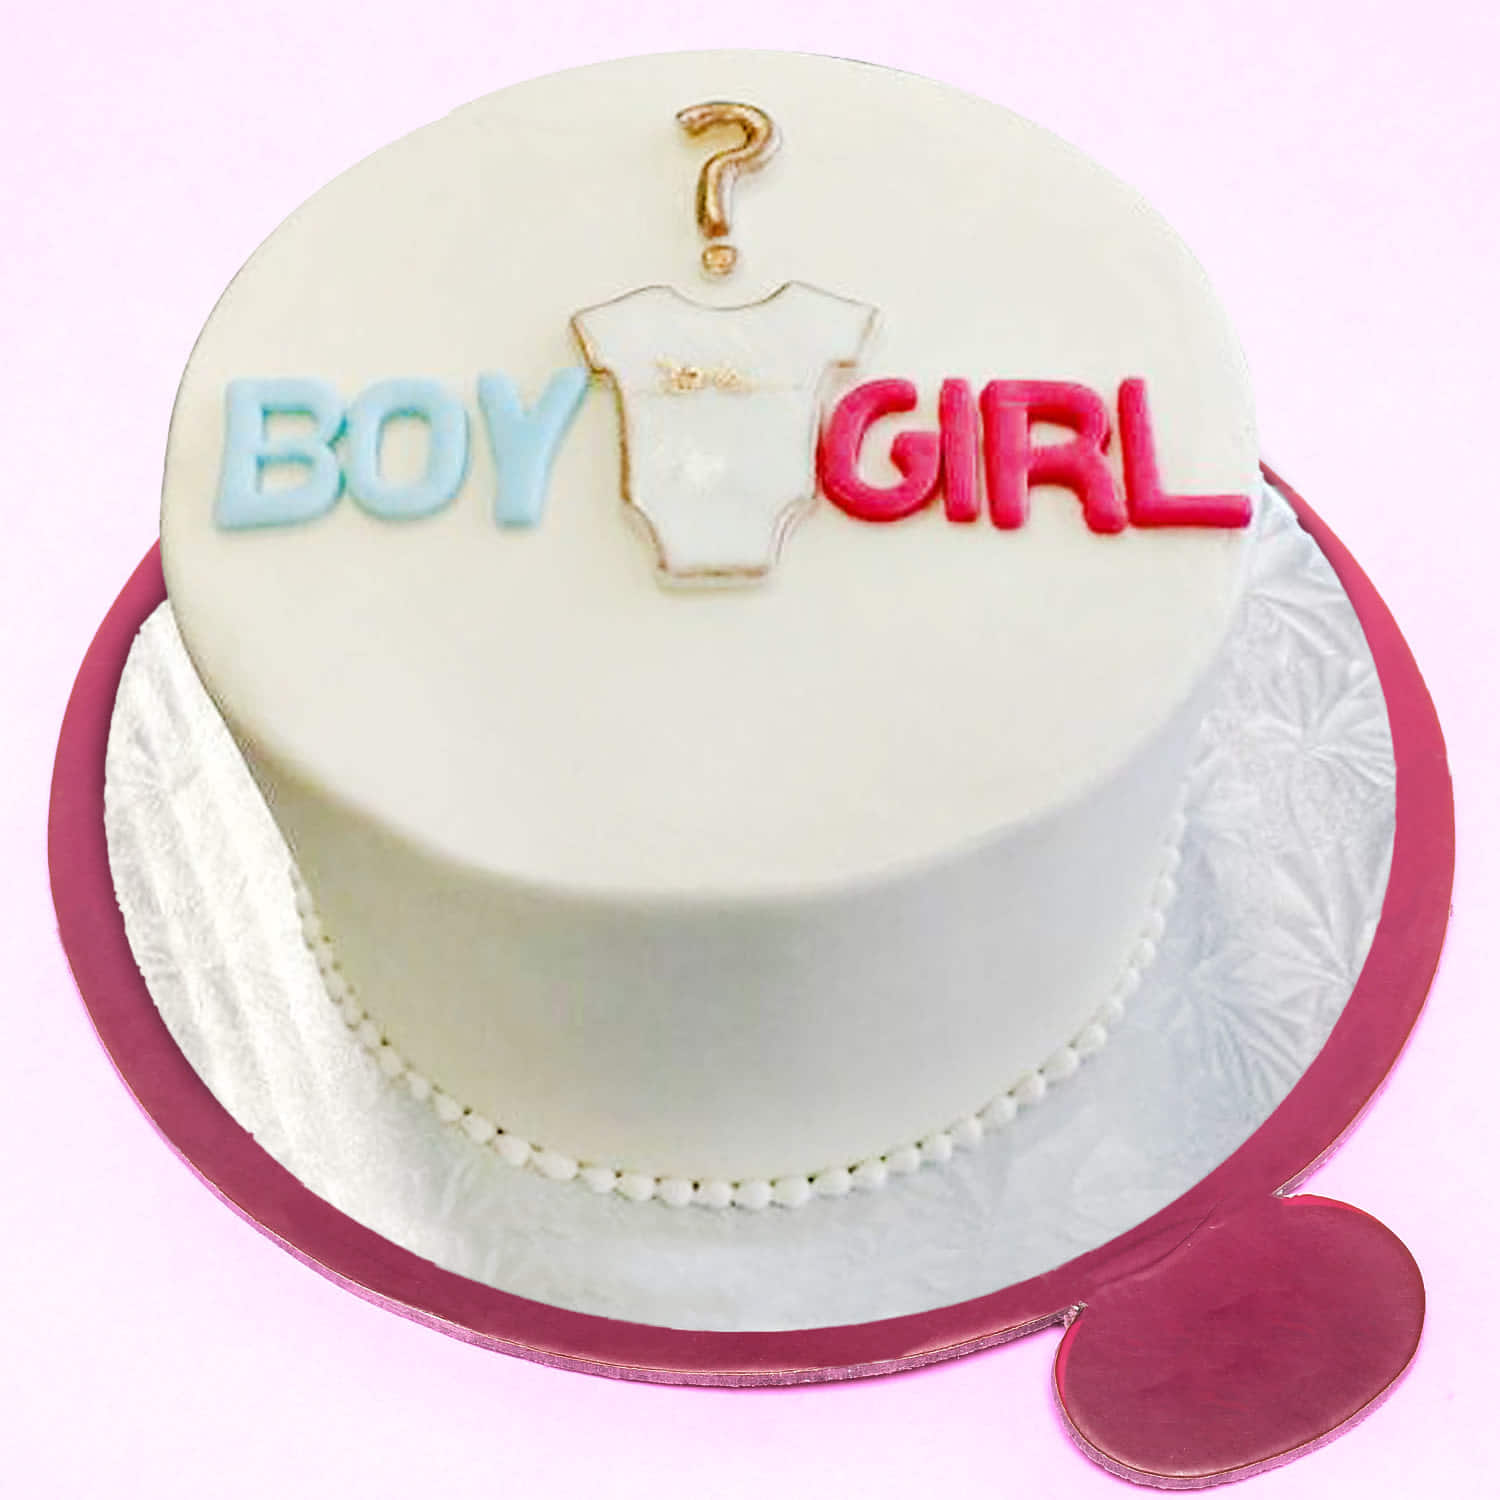 Best Baby Shower Cake Ideas (For Girls and Boys) - IzzyCooking